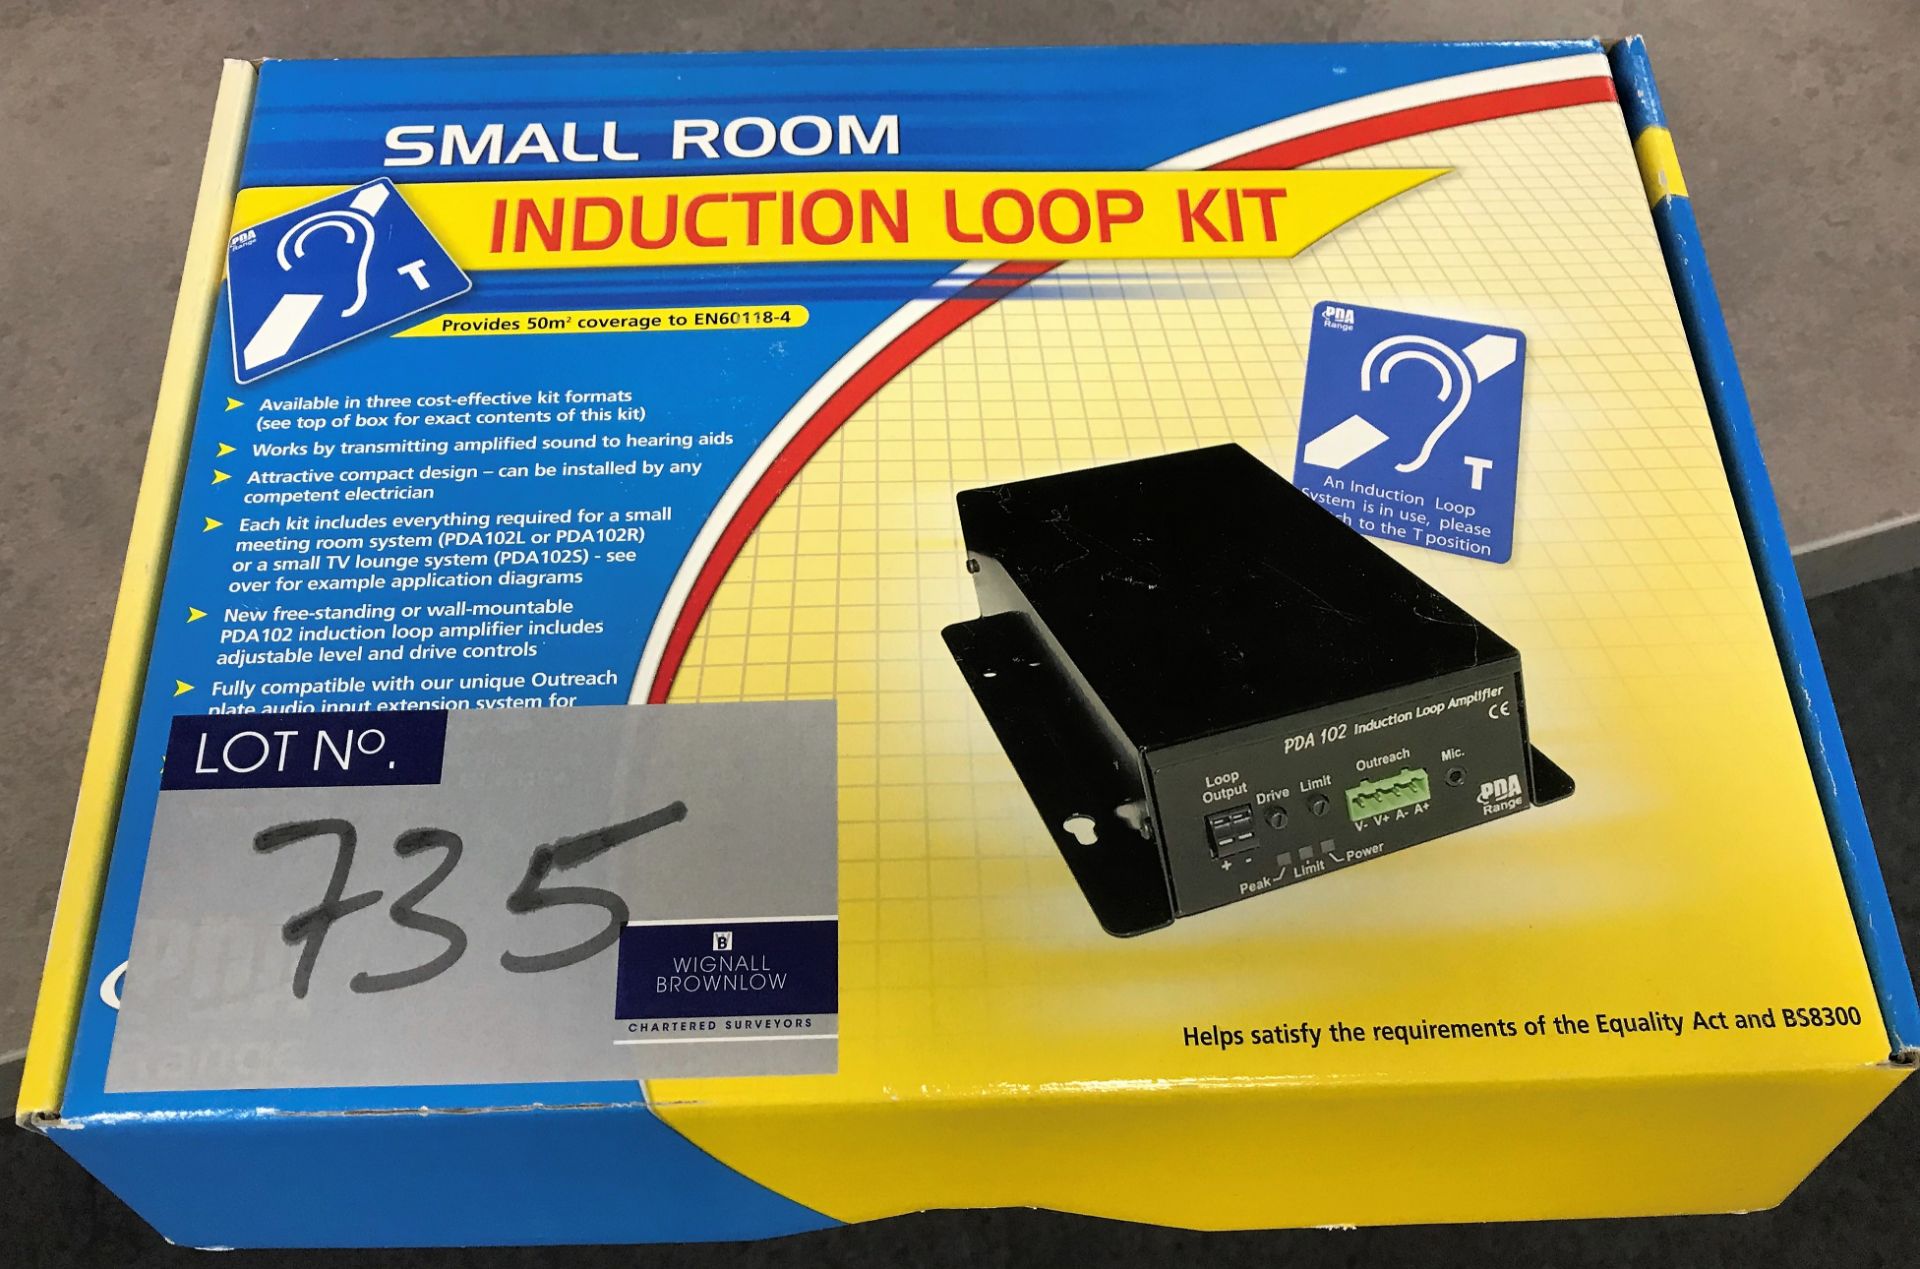 A PDA Model 102 Small Room Induction Loop Kit.